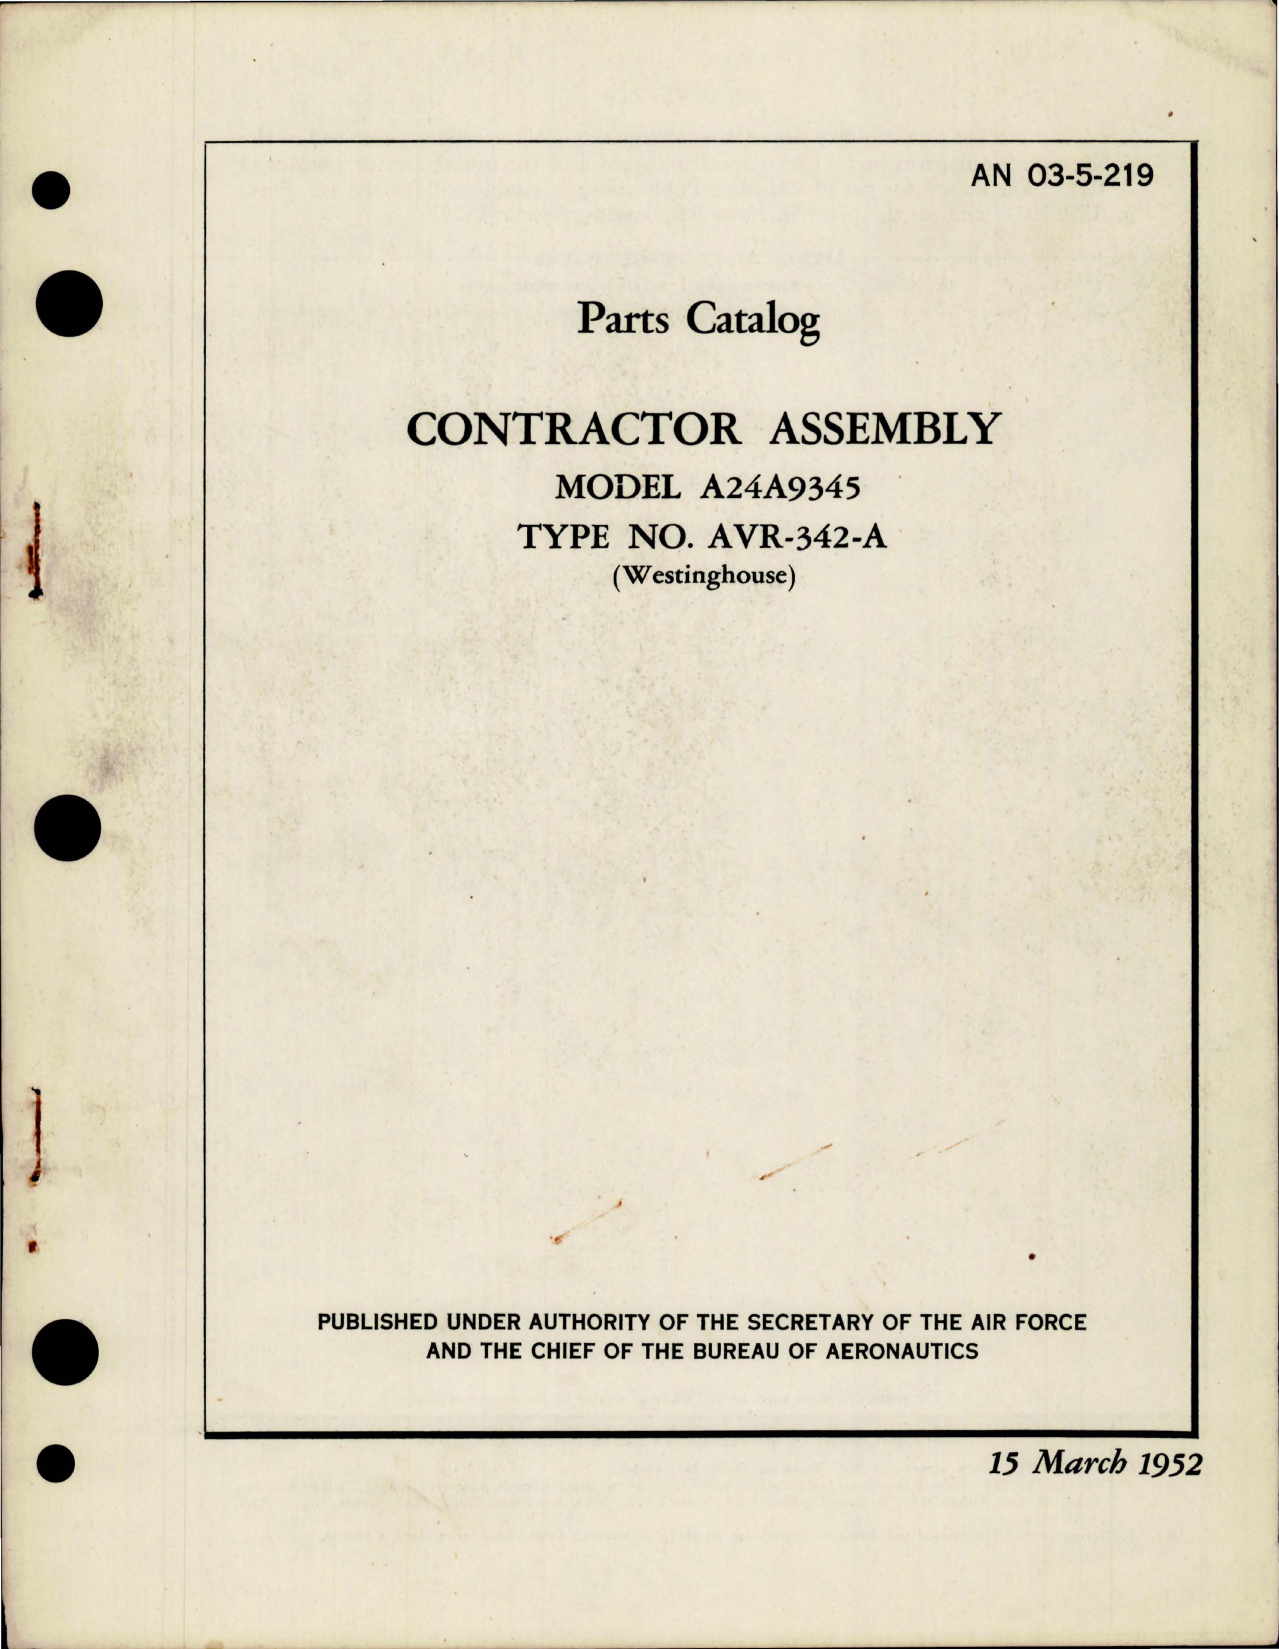 Sample page 1 from AirCorps Library document: Parts Catalog for Contractor Assembly - Model A24A9345 - Type AVR-342-A 